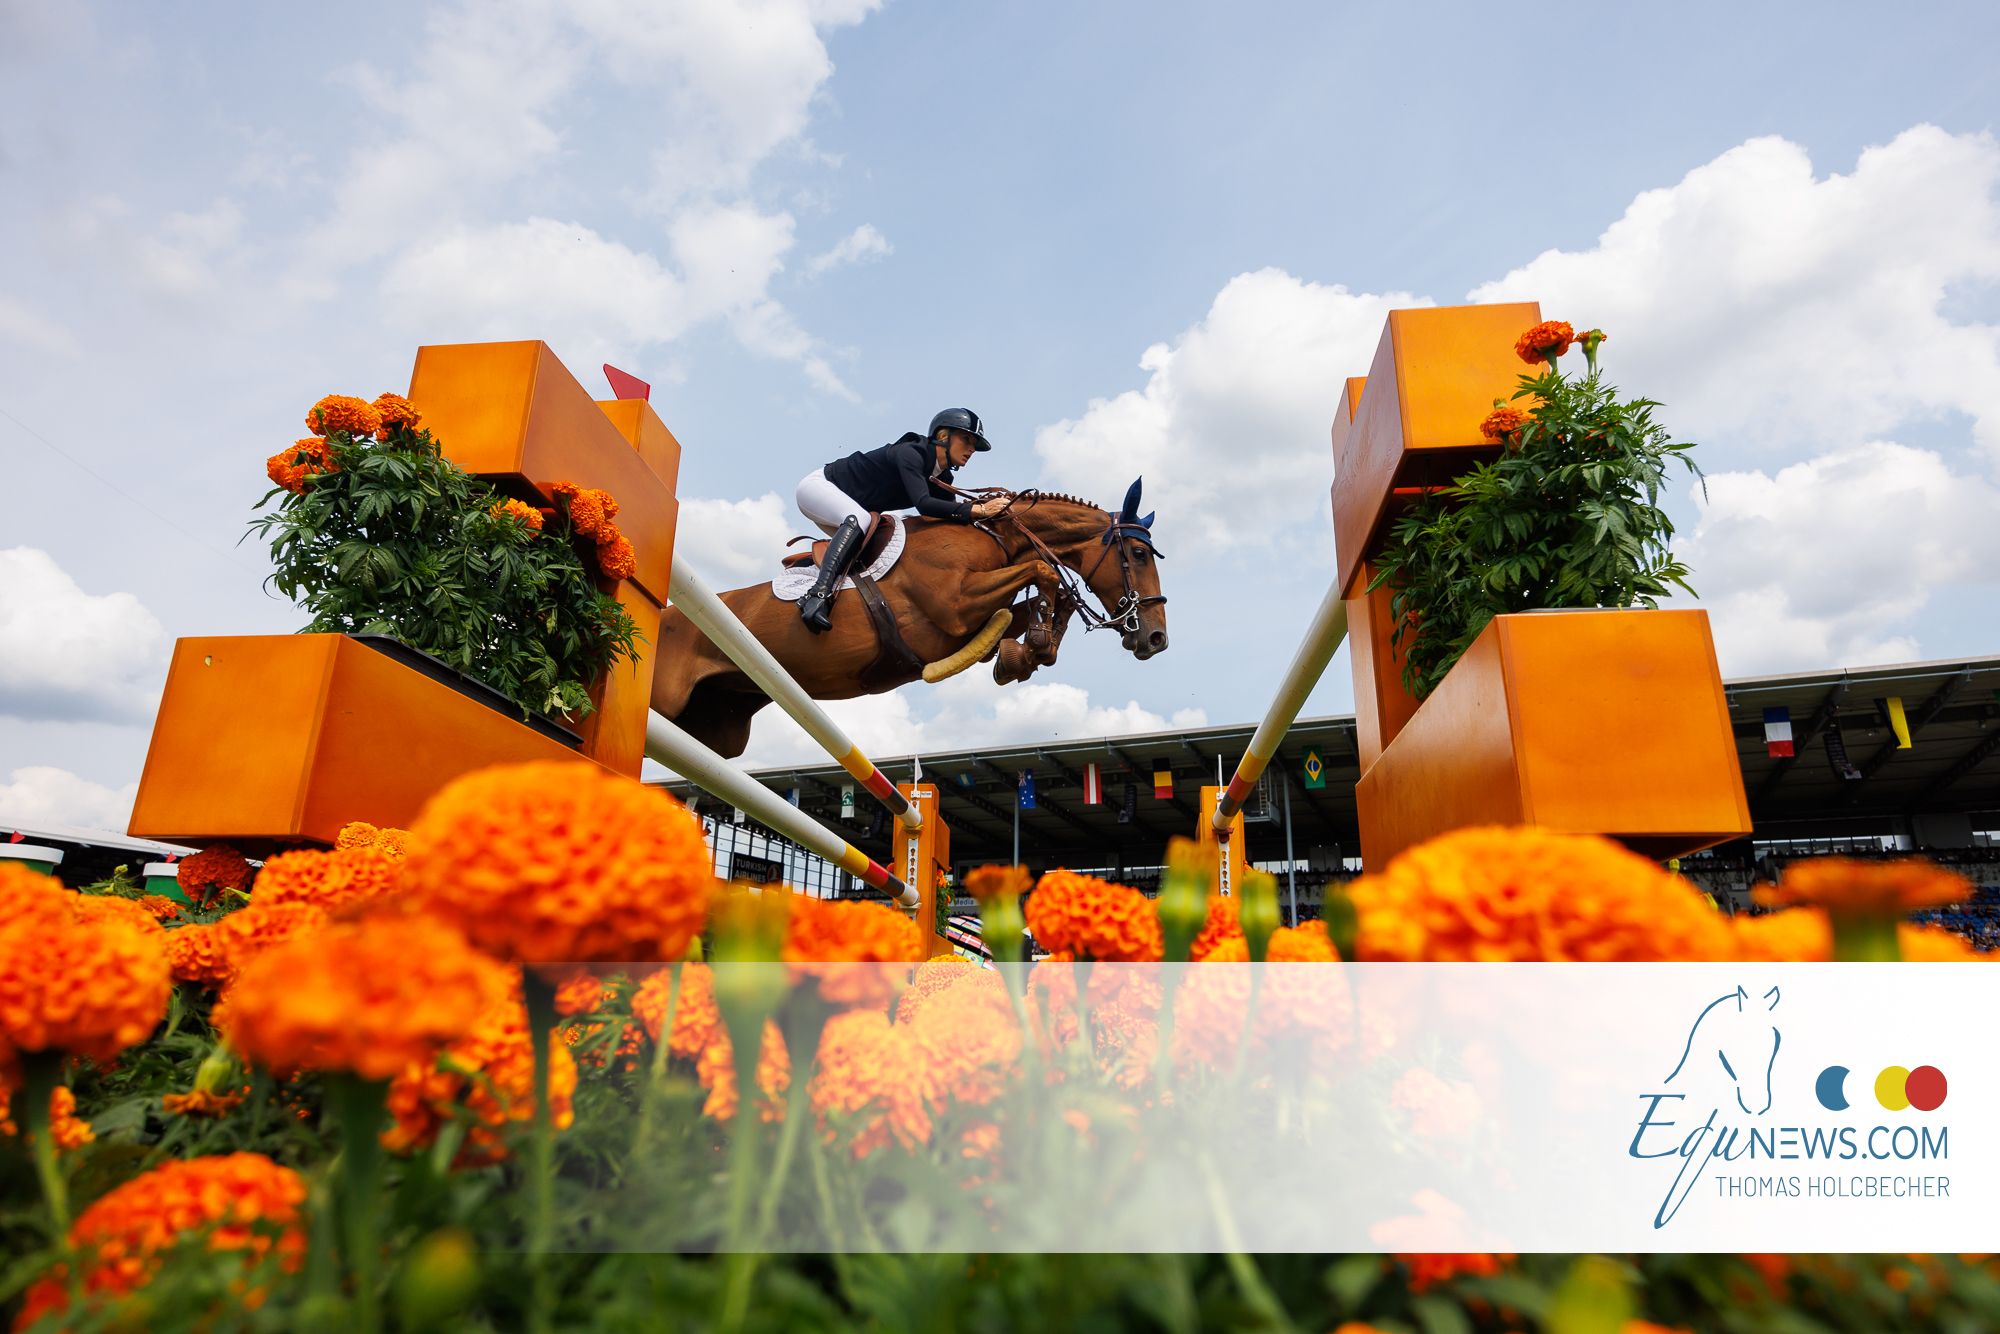 Jana Wargers and Dorette best in the CSI4* 1.55m Grand Prix at Sentower Park